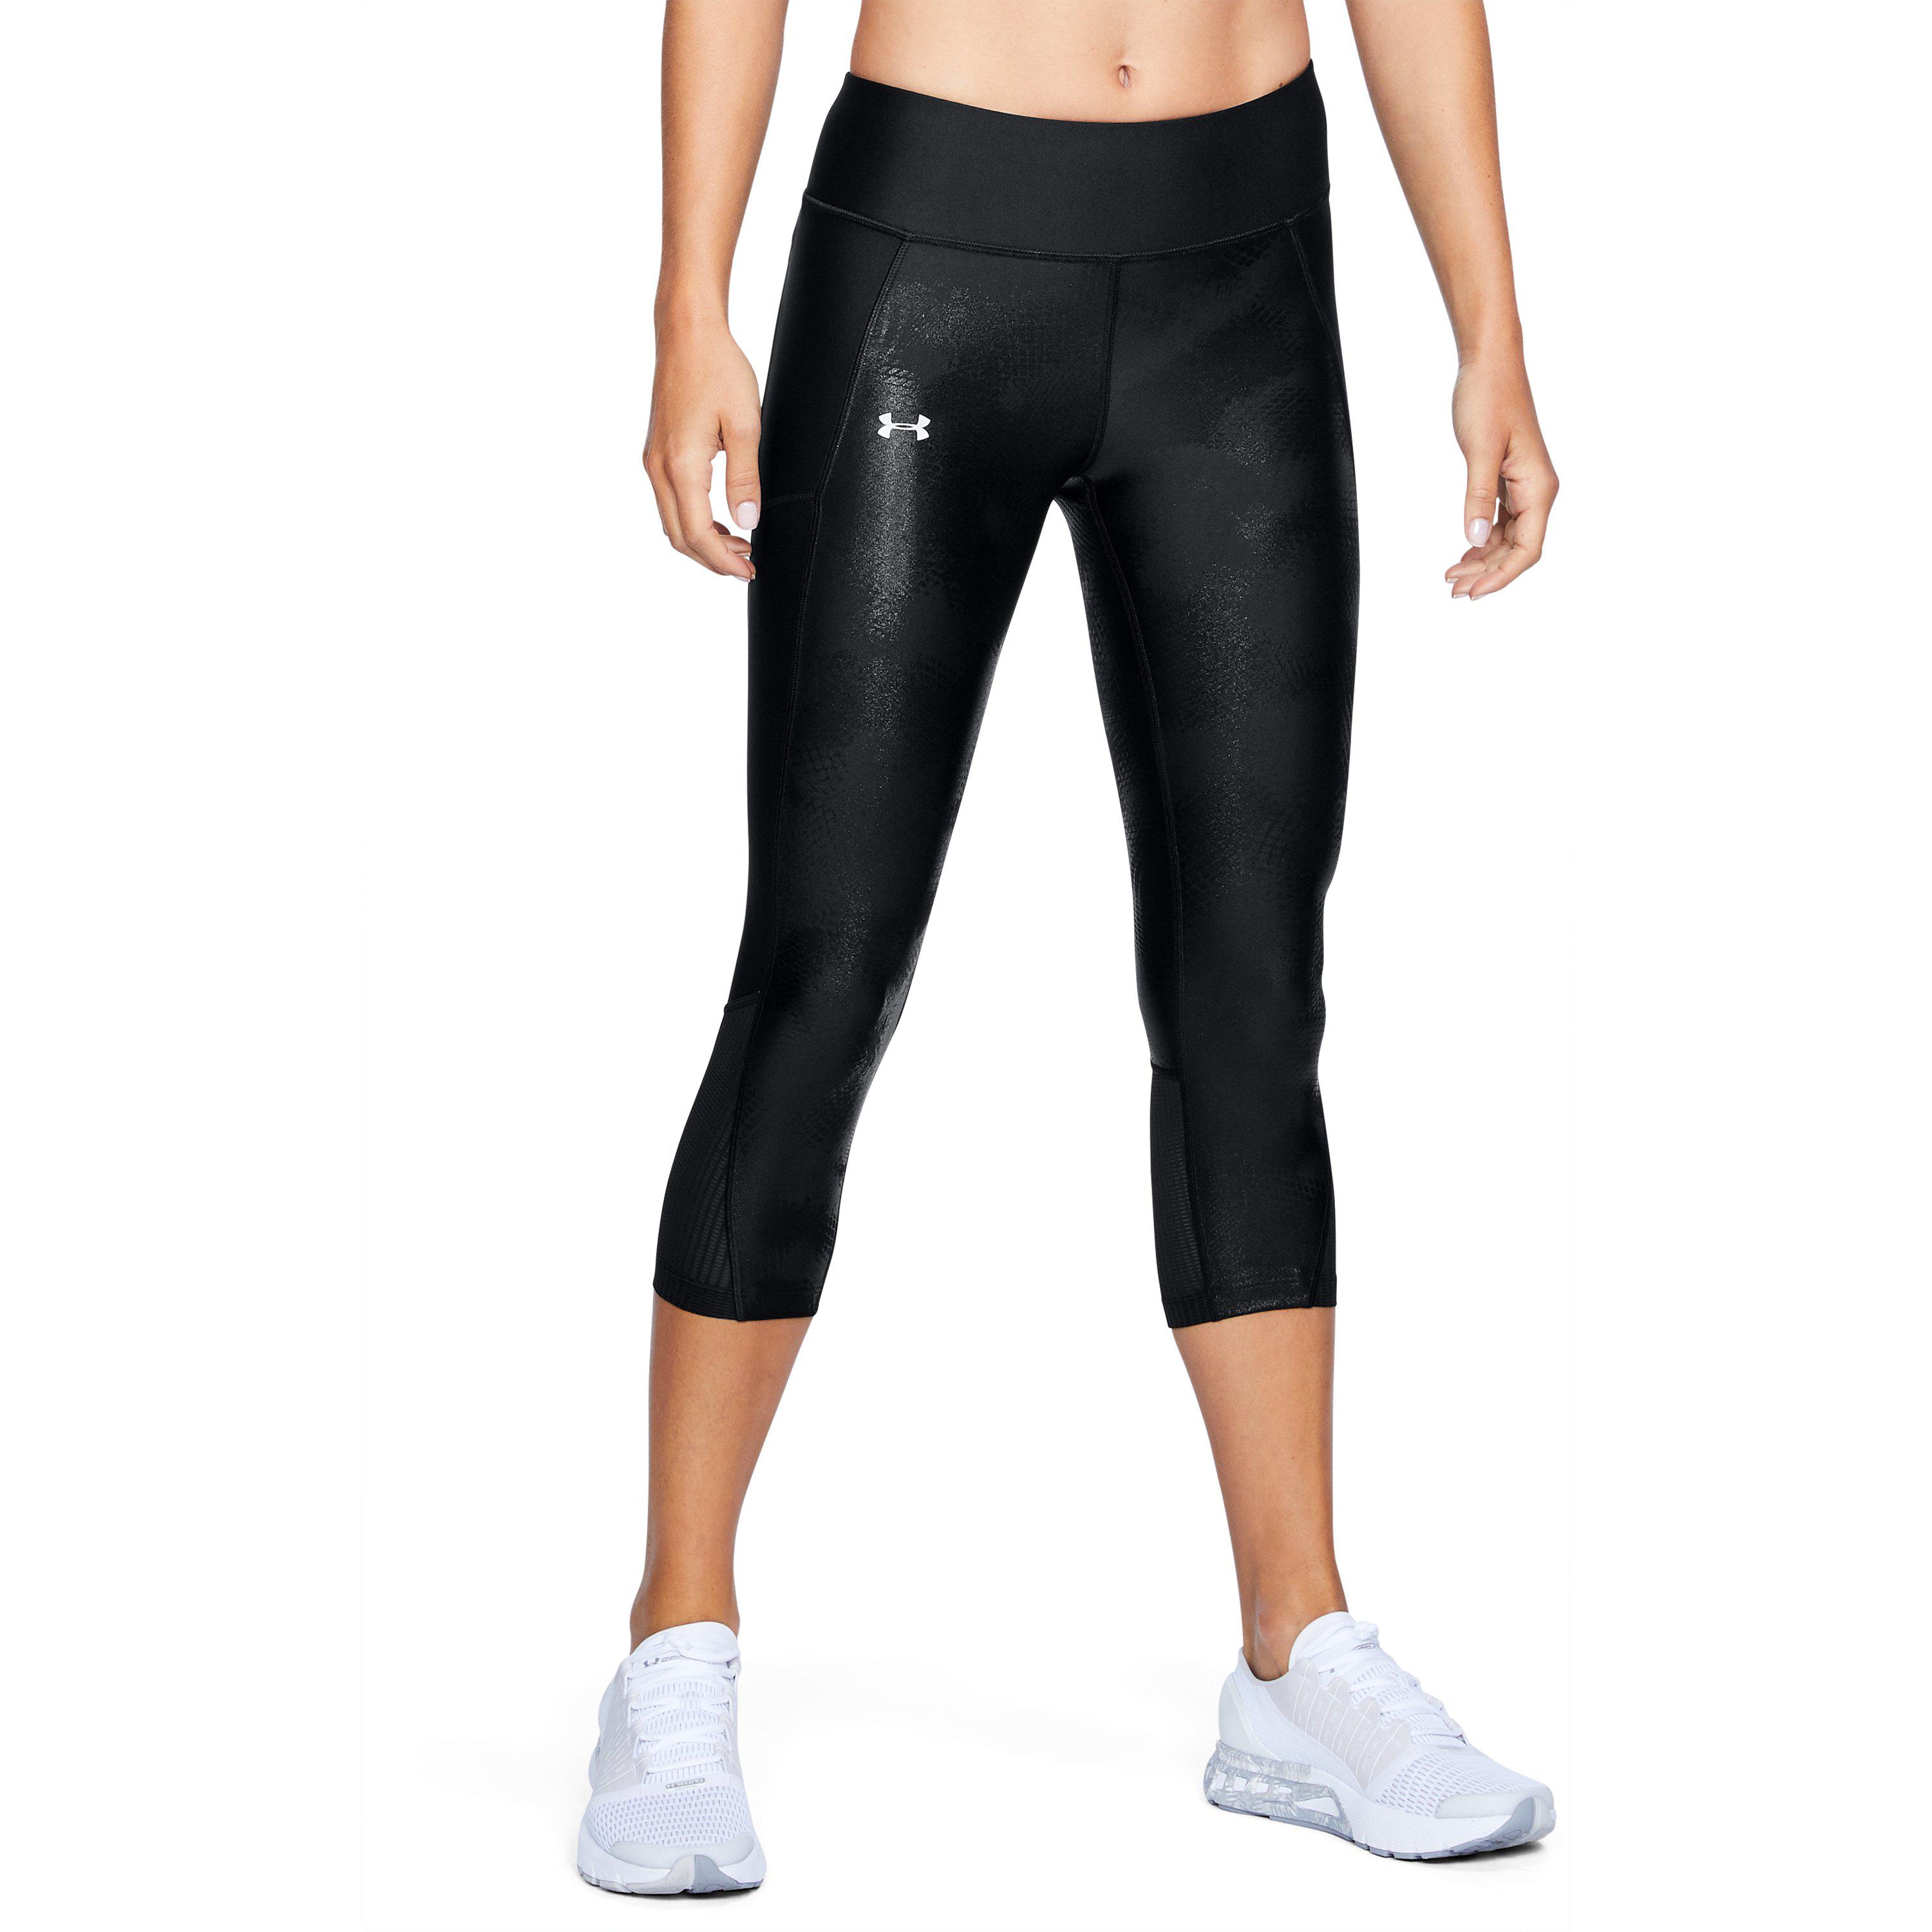 Under Armour Damen Fly by Printed Capri 